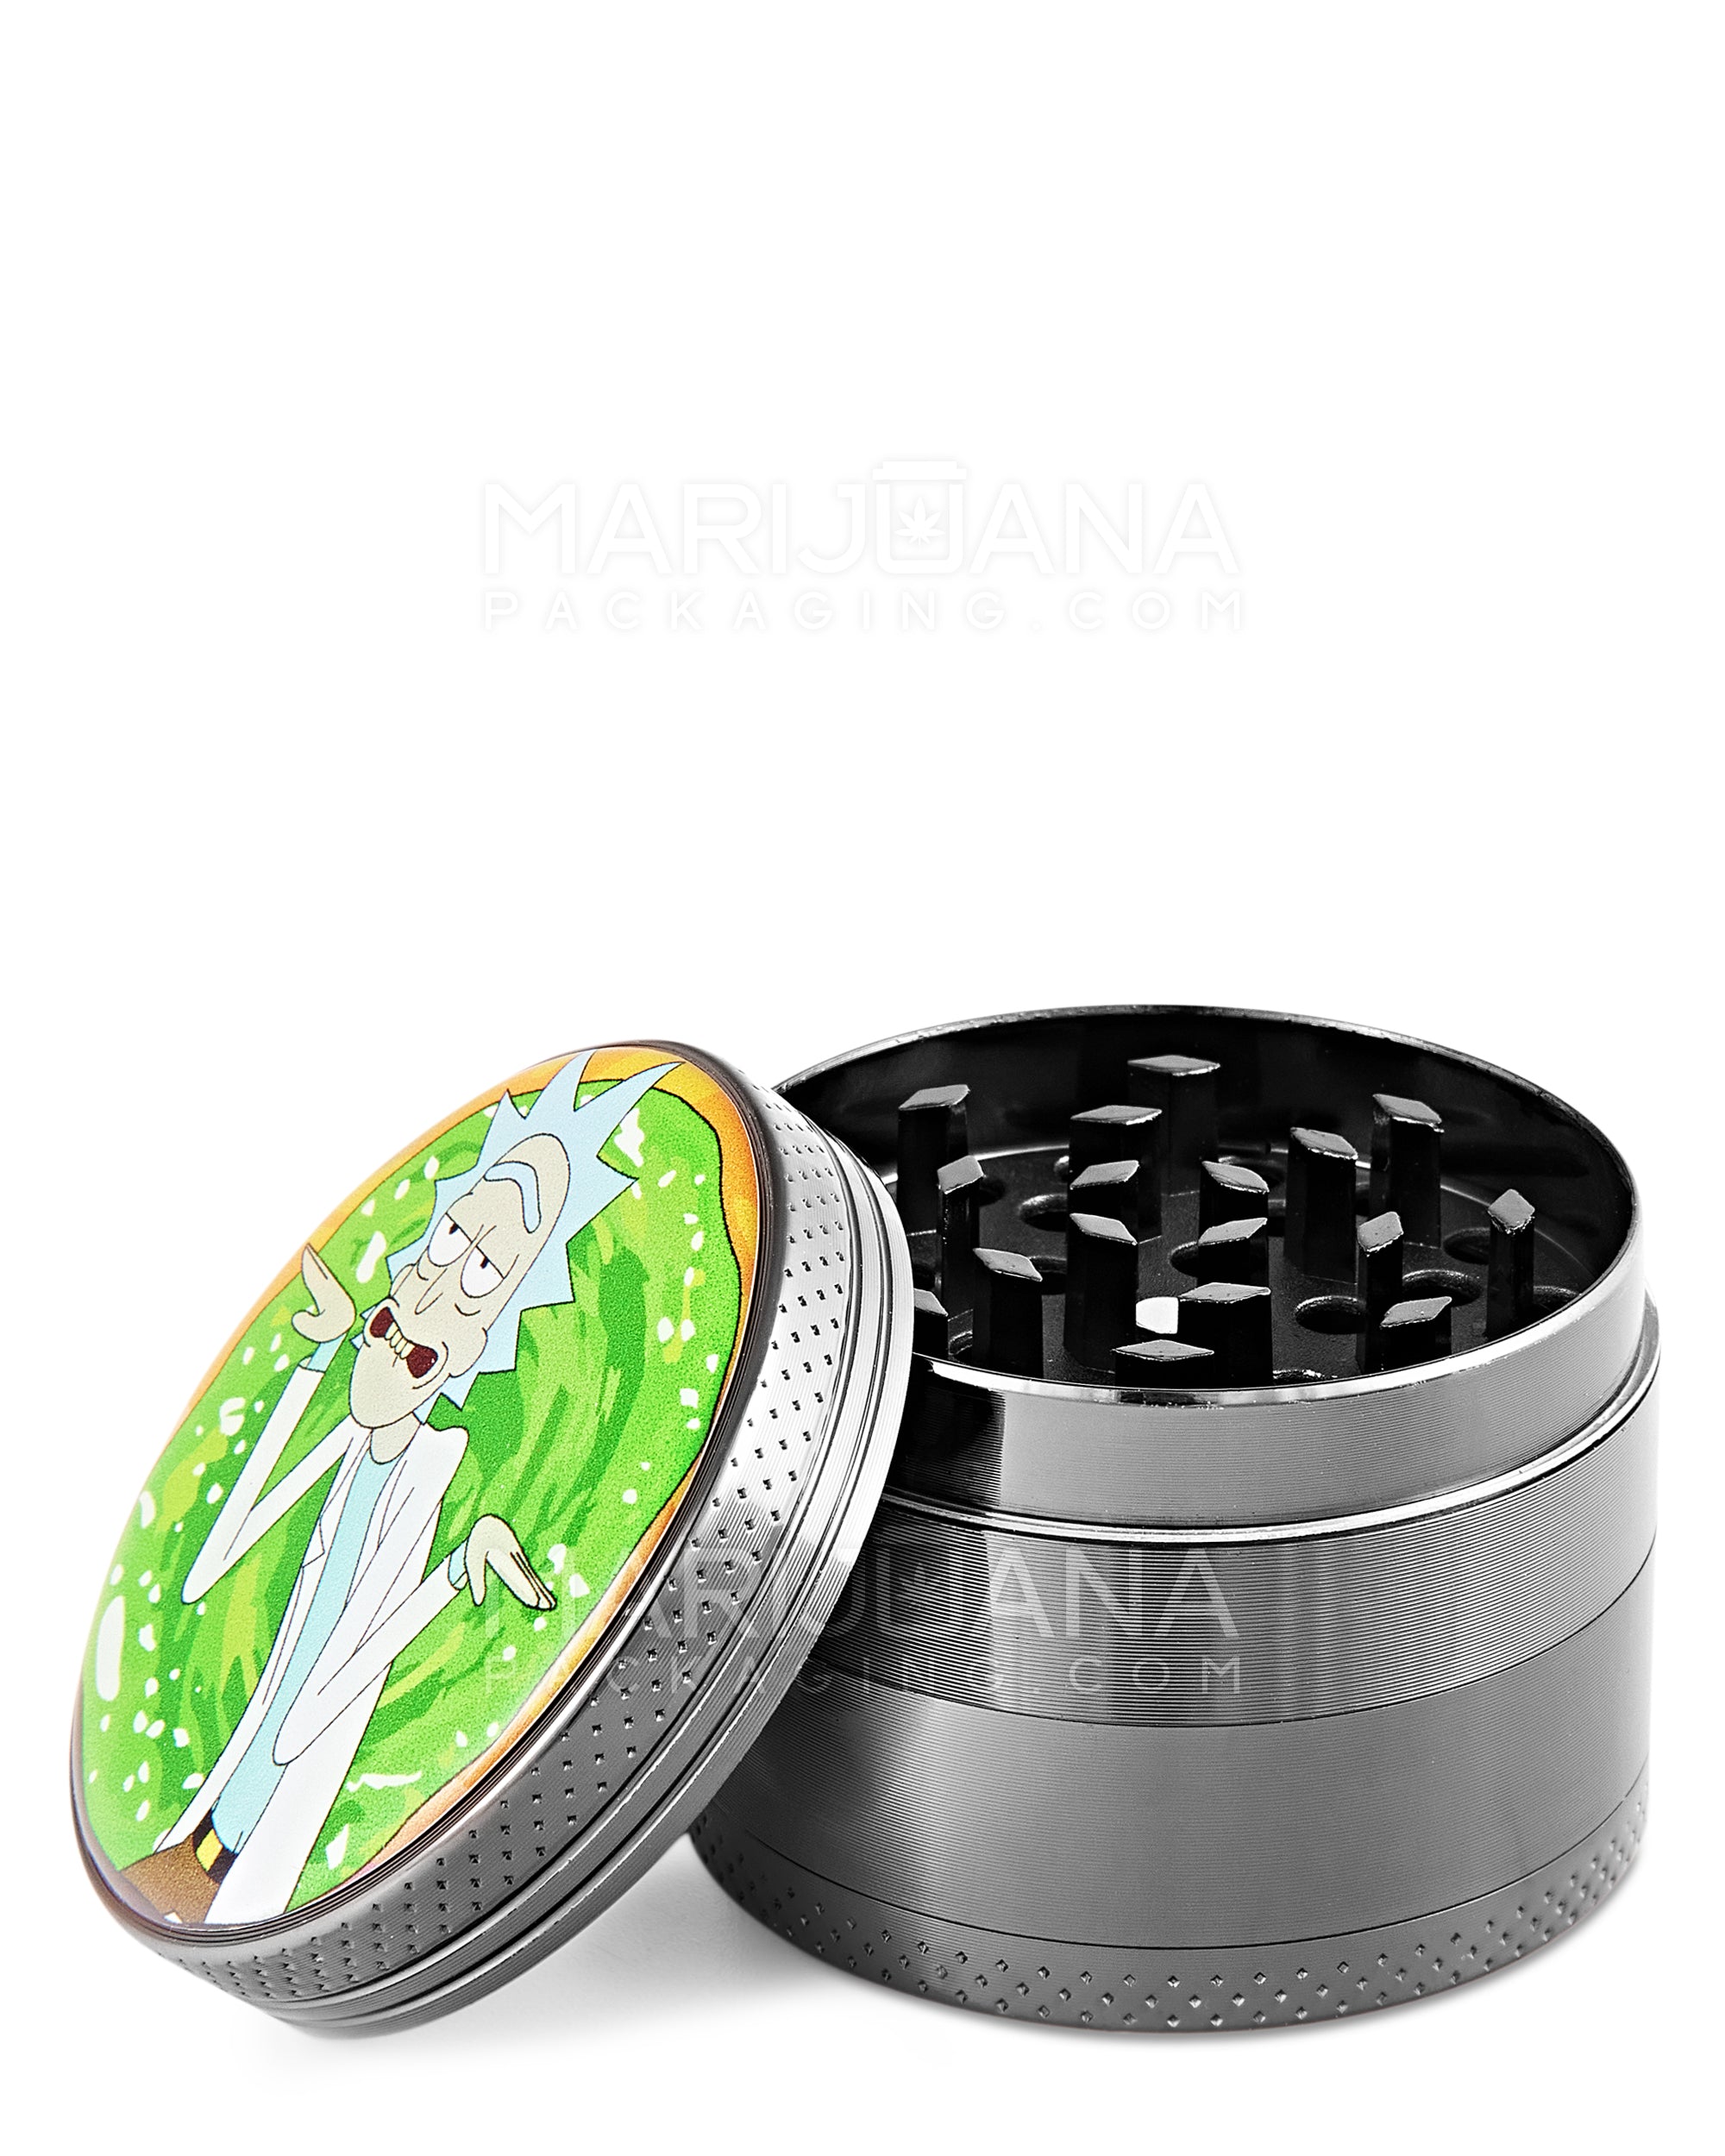 R&M Decal Magnetic Metal Grinder w/ Catcher | 4 Piece - 50mm - Assorted - 1